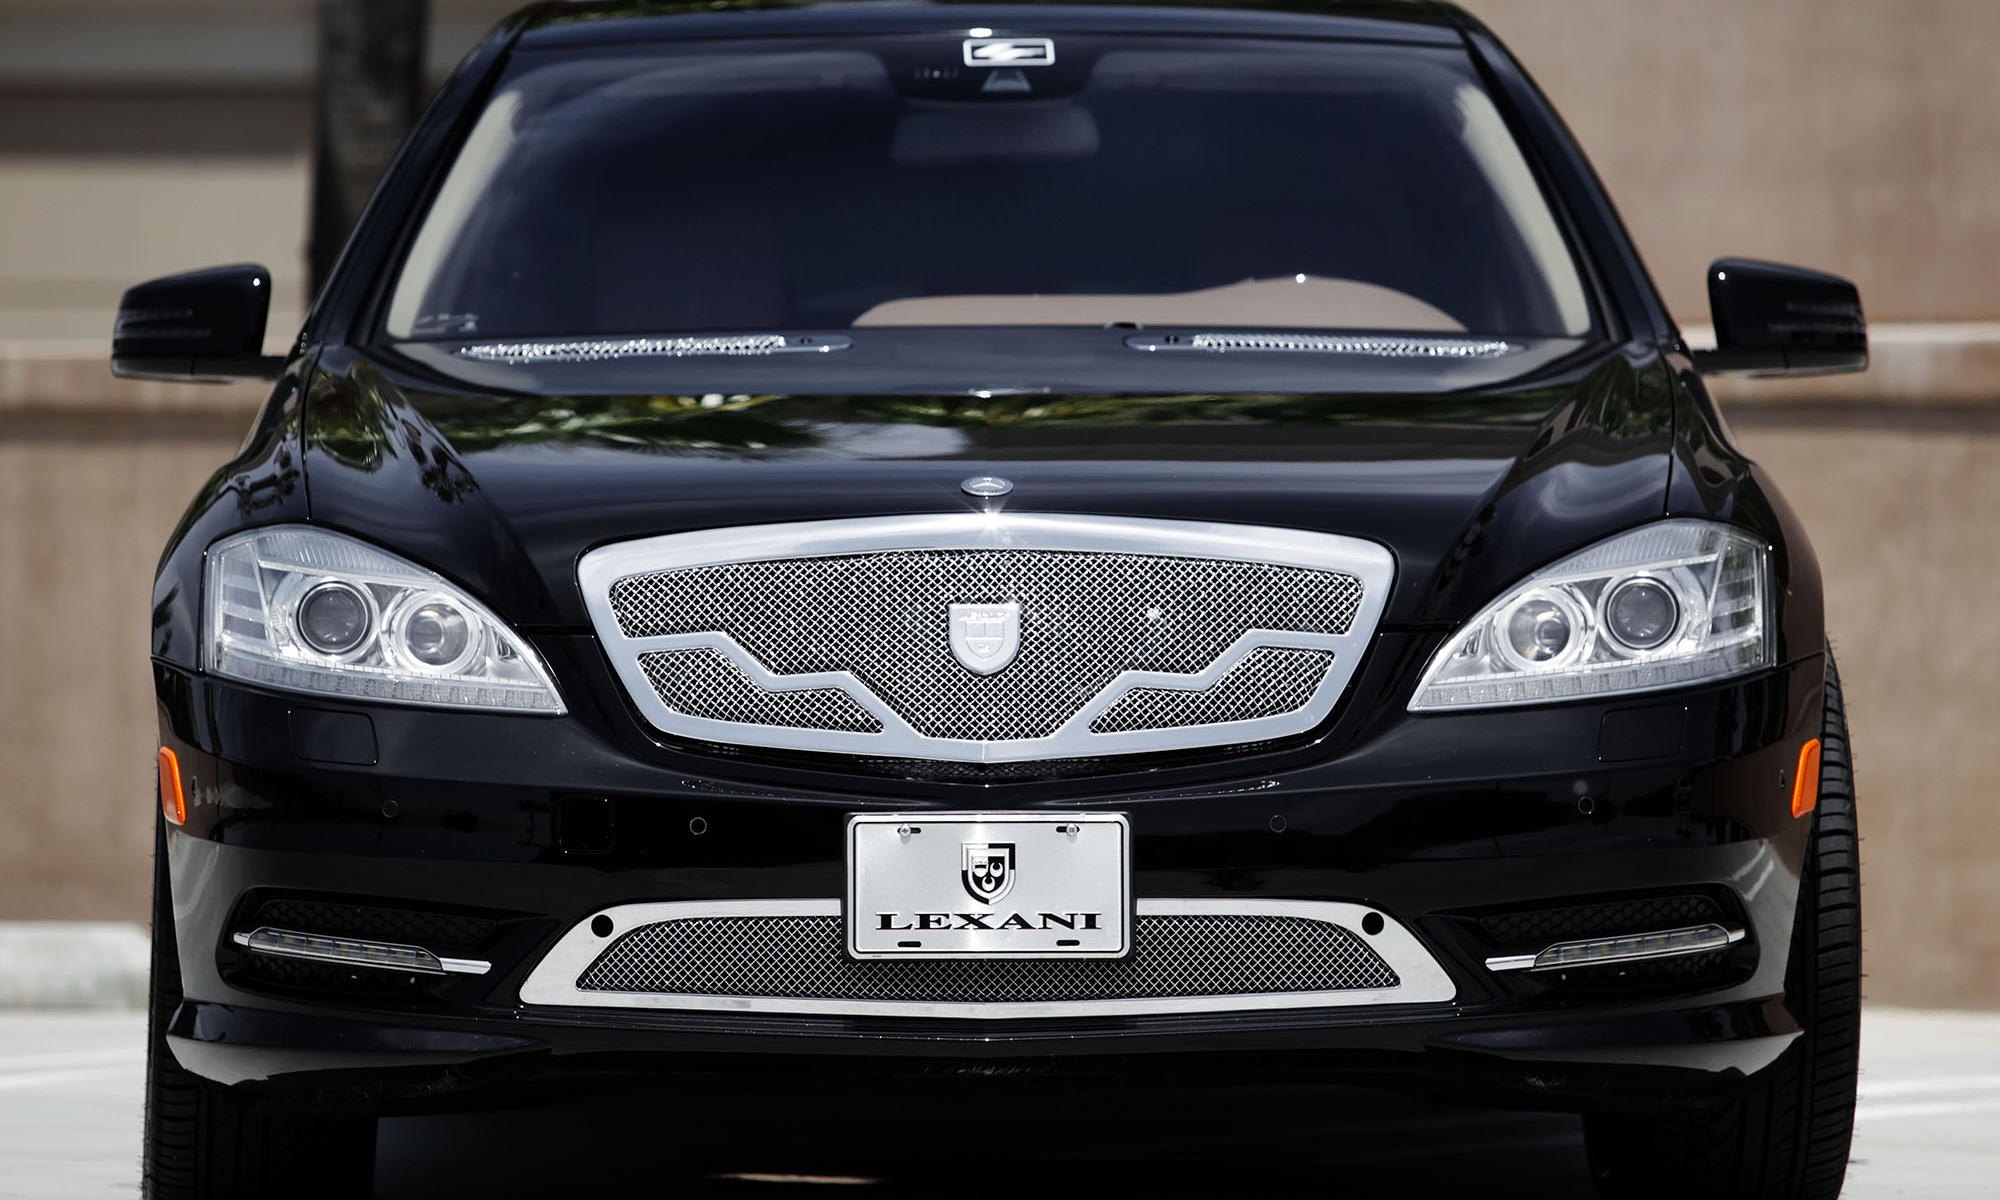 Black Mercedes S-Class with Custom Chrome Grille - Photo by Lexani